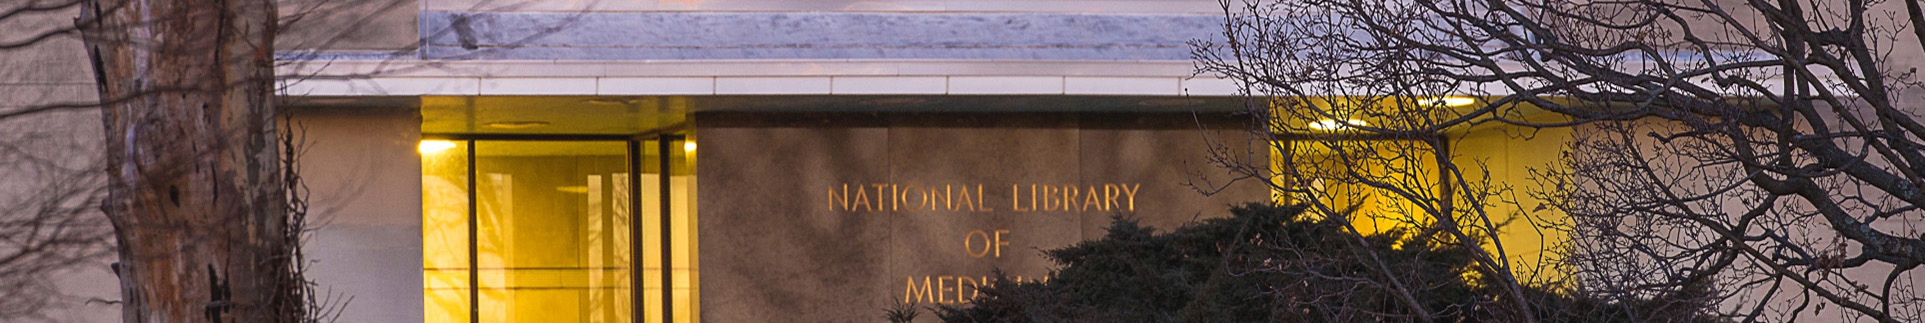 cropped image of the NLM building